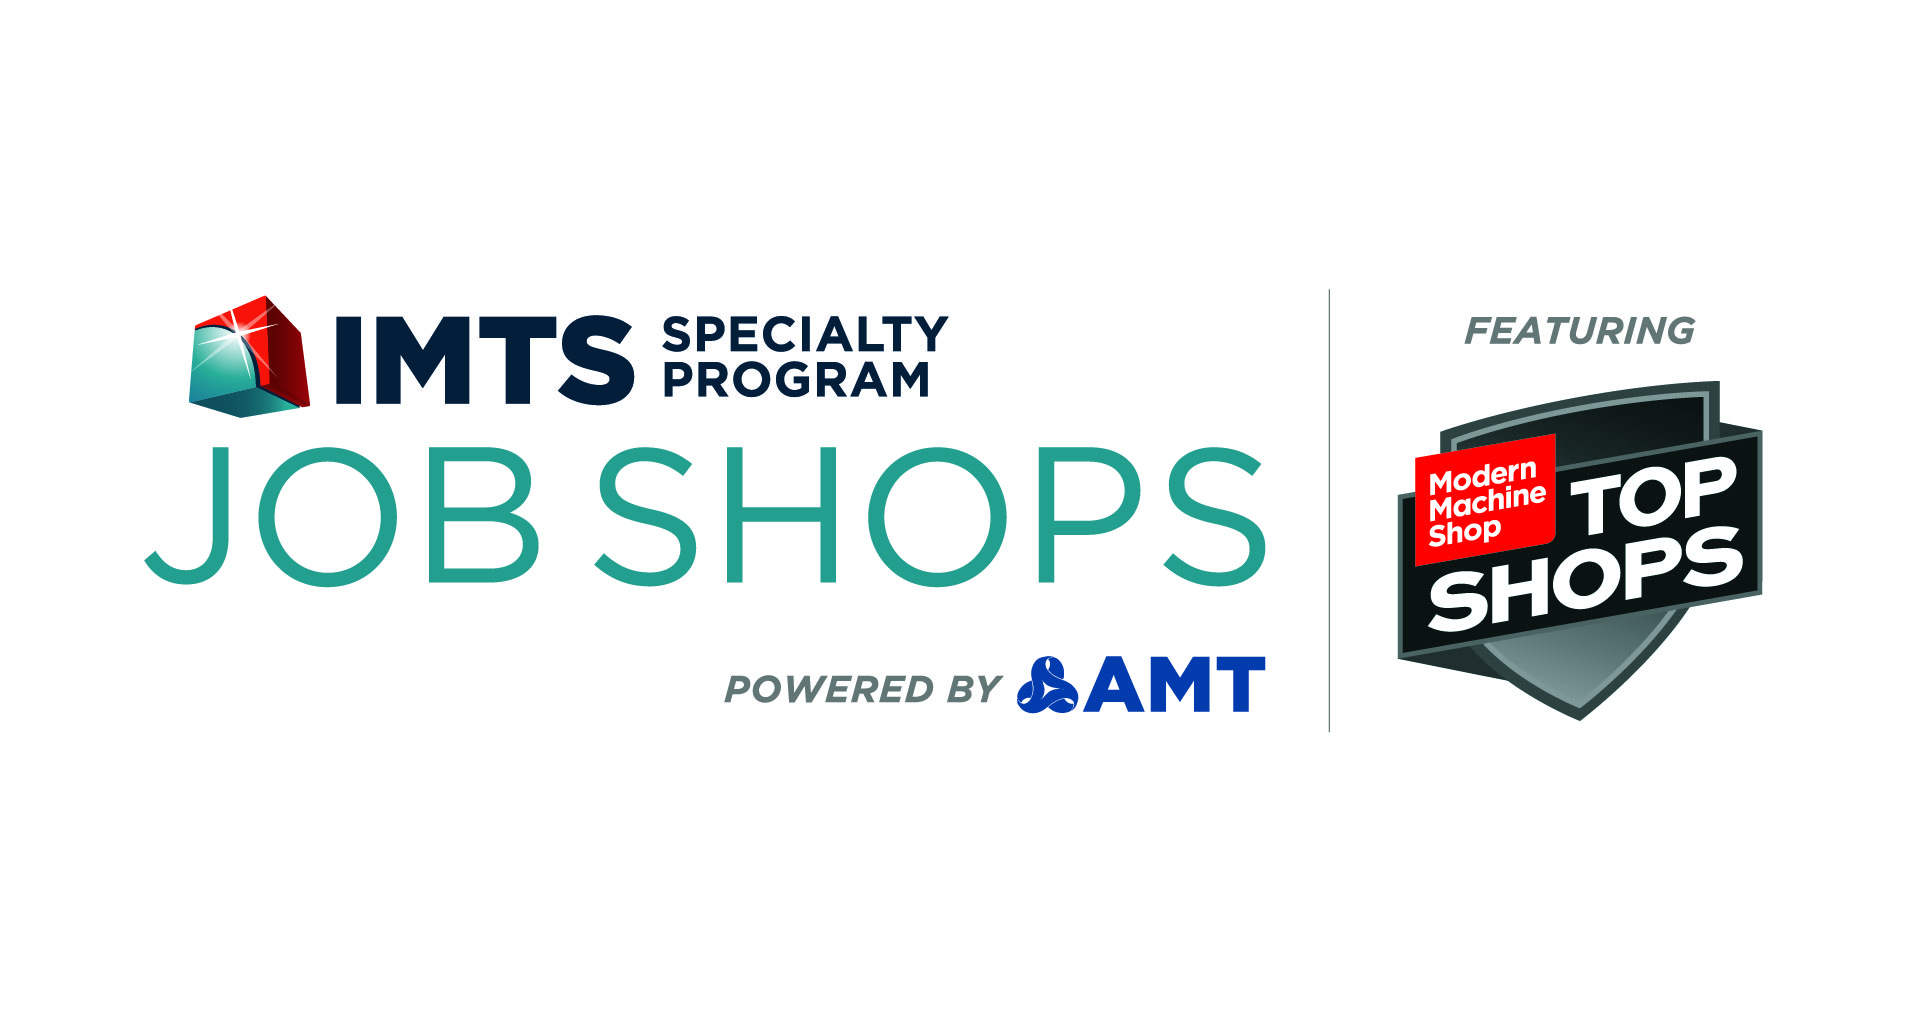 IMTS Specialty Program: Job Shops Featuring MMS Top Shops